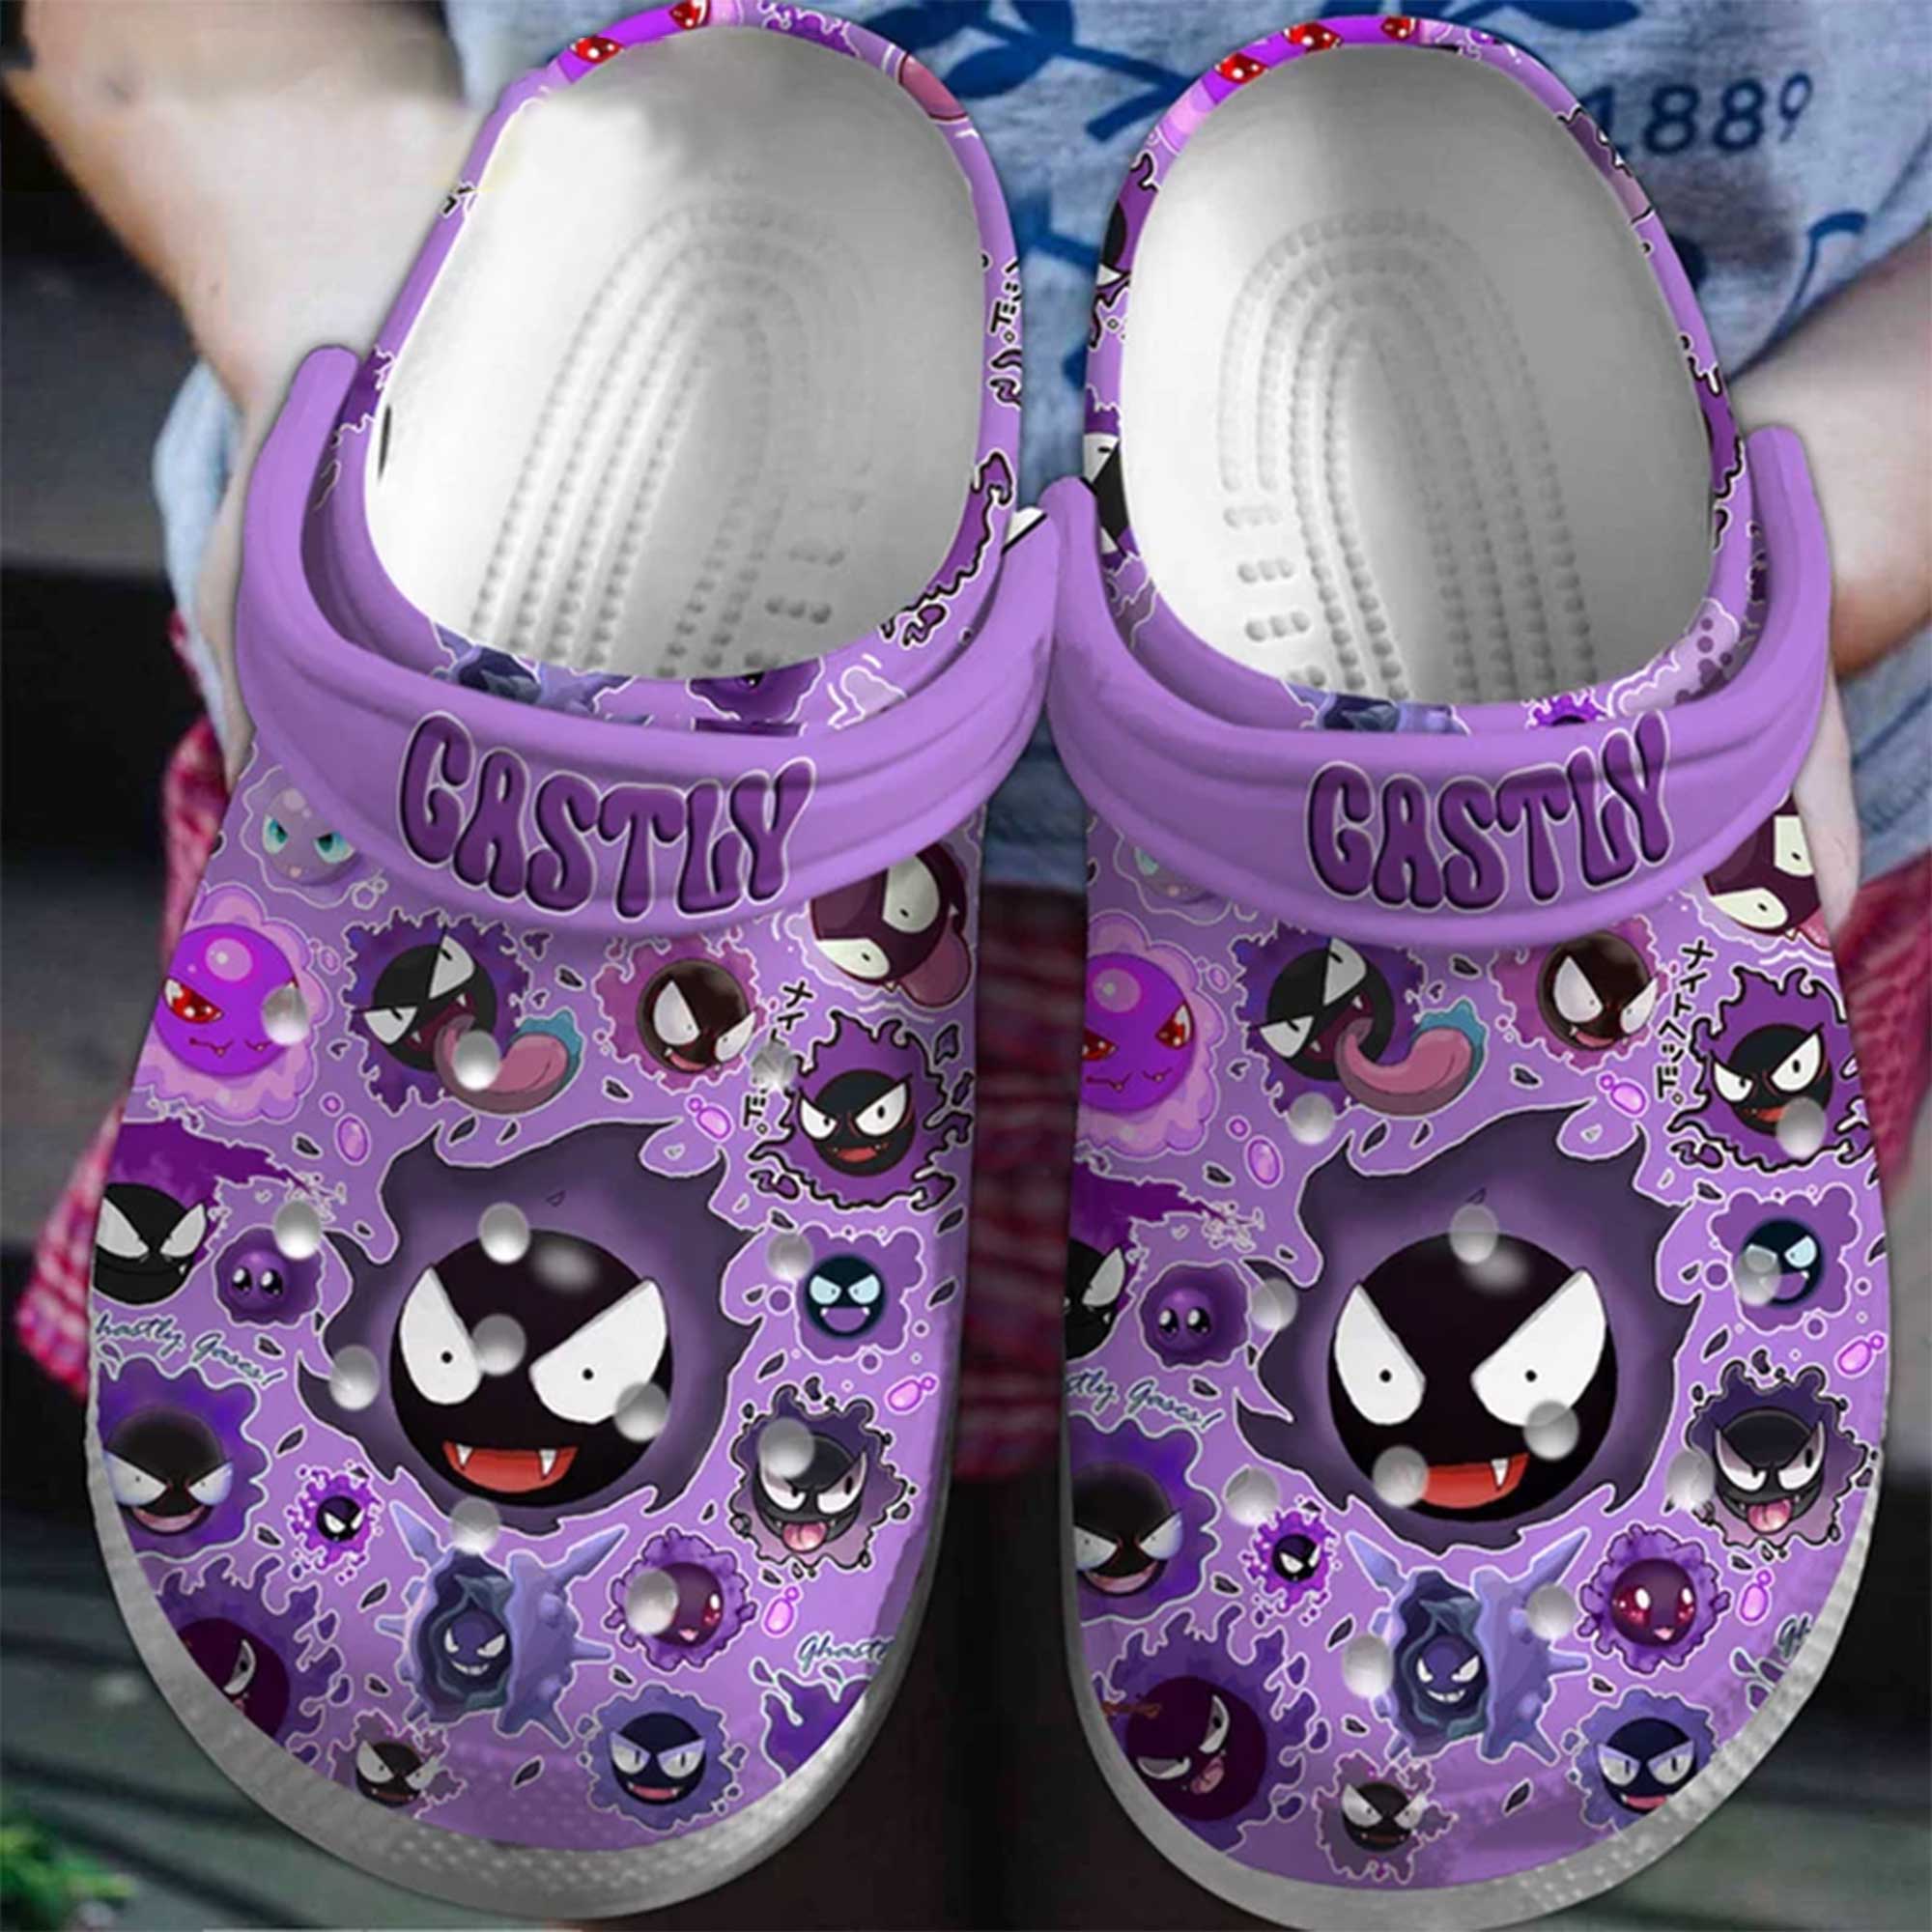 for pokemon fan adult unisex and breathable gengar on the purple crocs order now for a special discount kmjoz